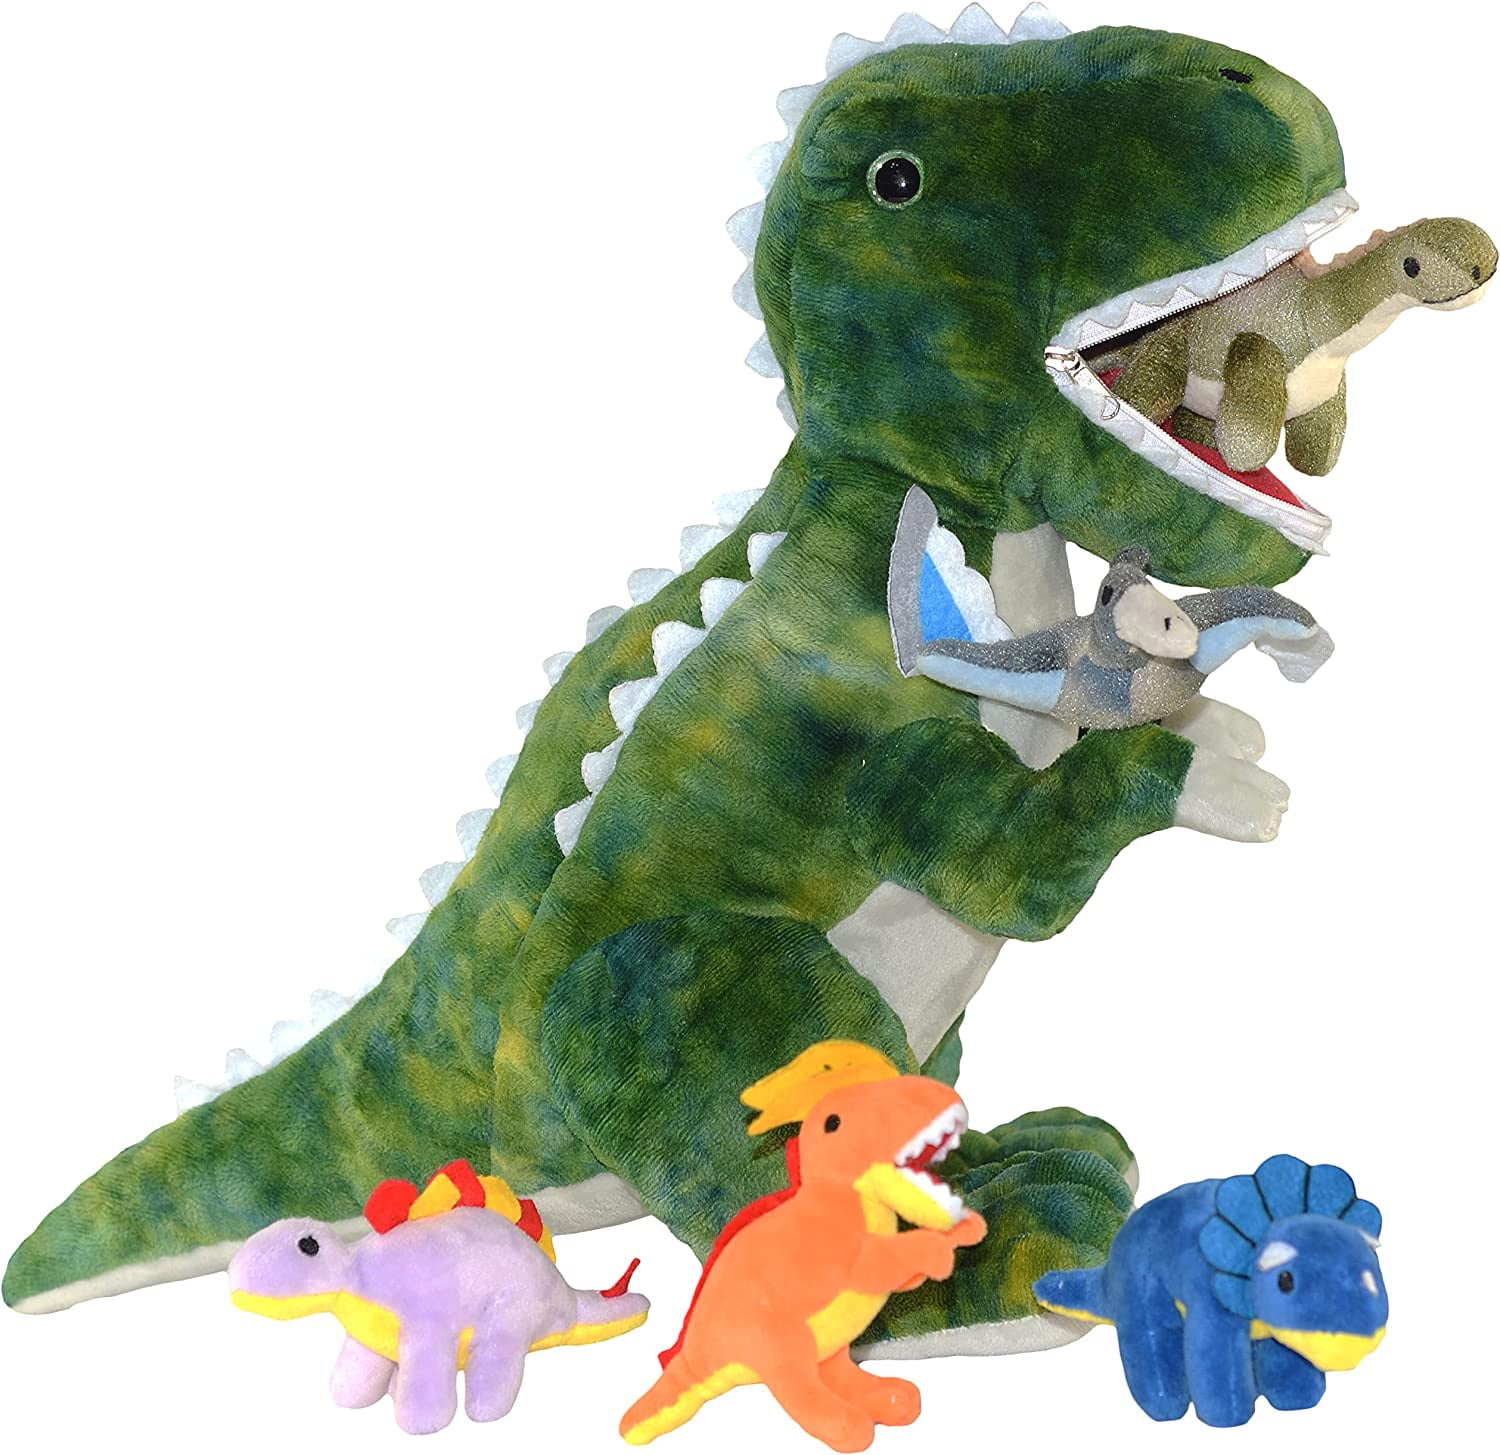 DreamsBe Dinosaur Stuffed Animal T-Rex and 5 Little Dinos for Boys & Girls  - Plush Stuffie with Zippered Pocket Eating Dinosaurs Gift Ages 3 4 6 7 8 9